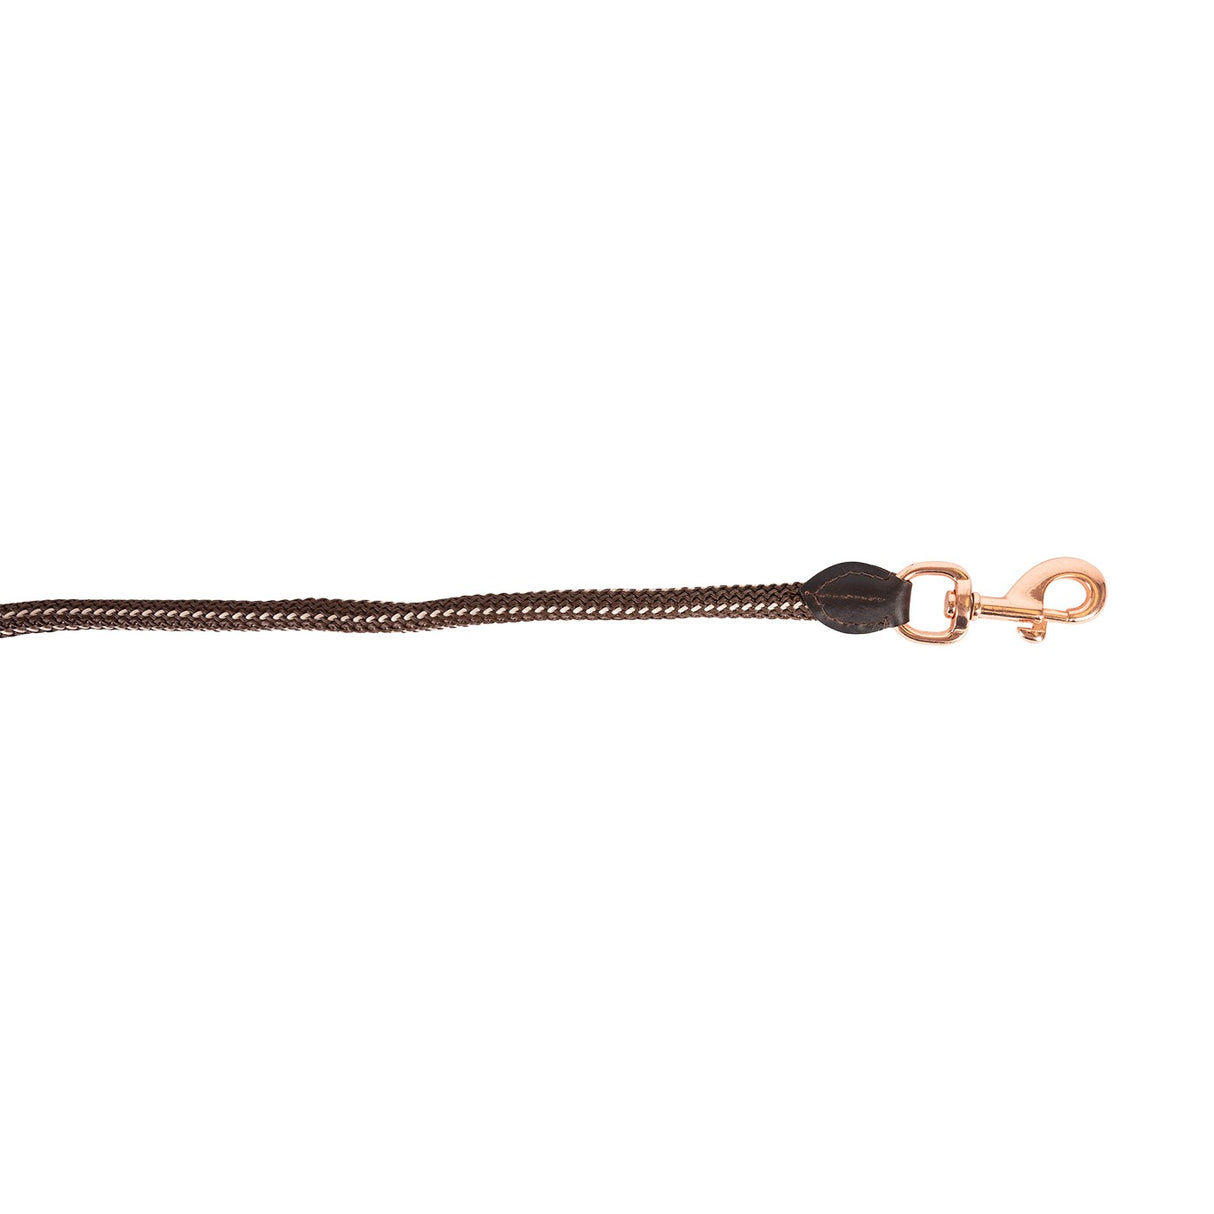 Shedrow Rose Gold Nylon & Leather Lead